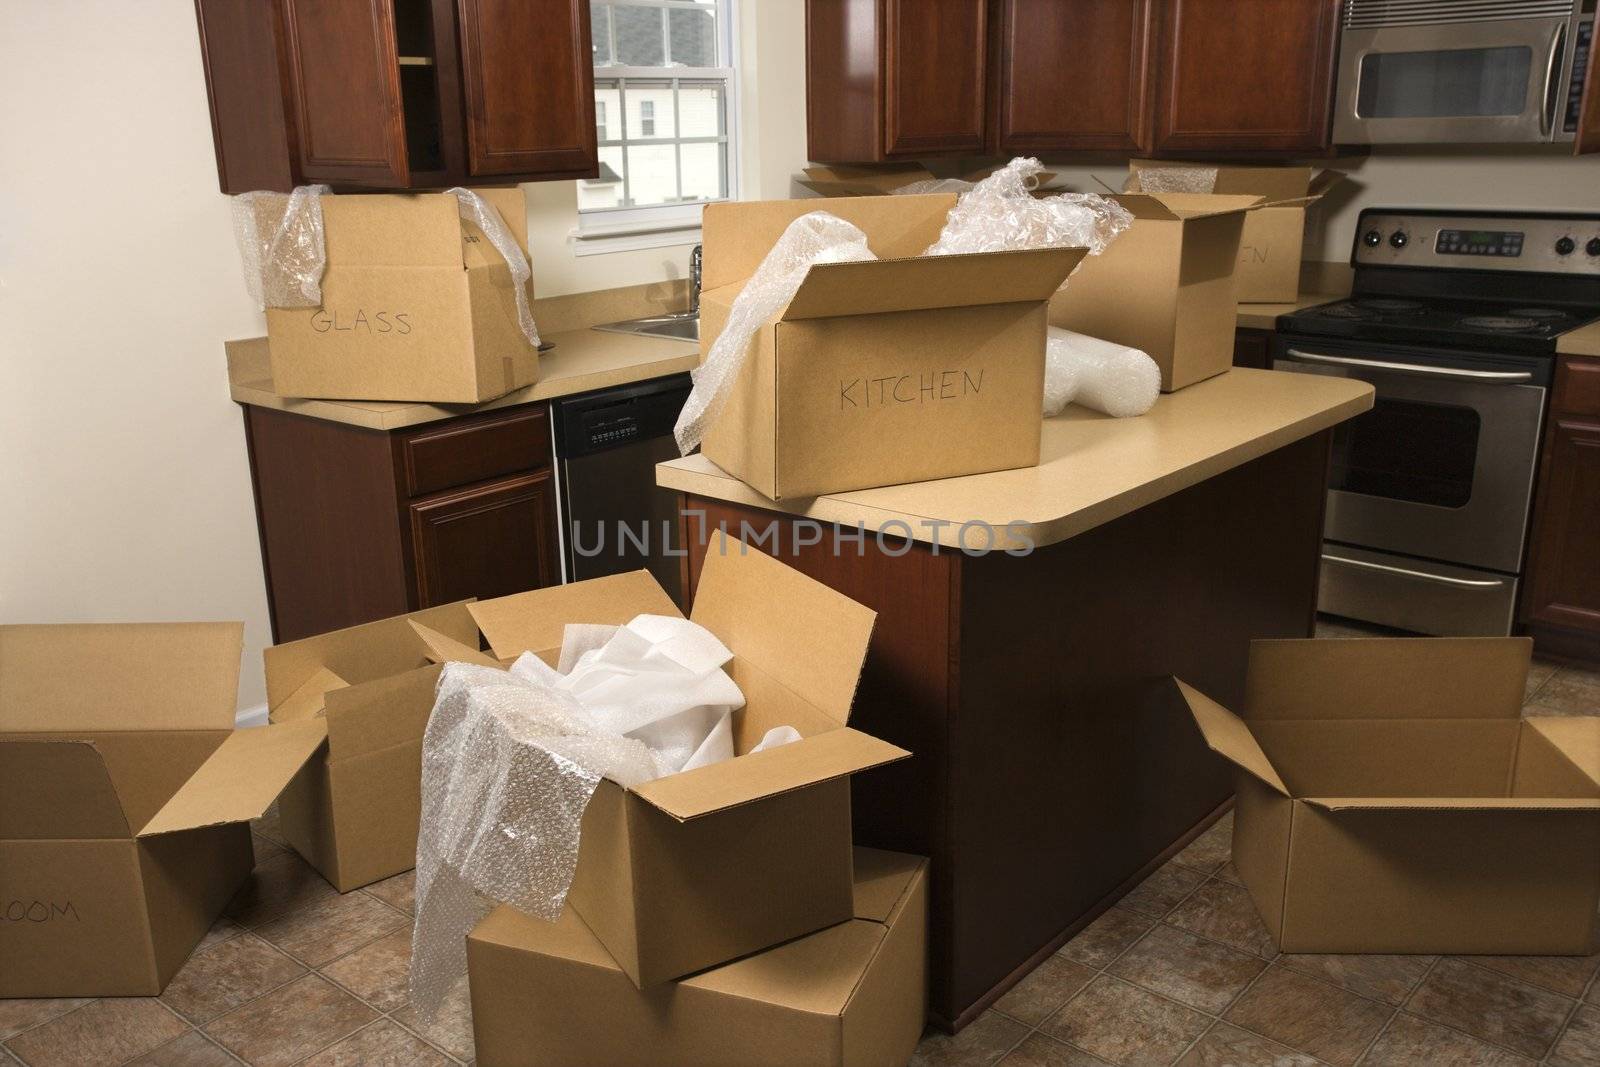 Moving boxes in kitchen. by iofoto